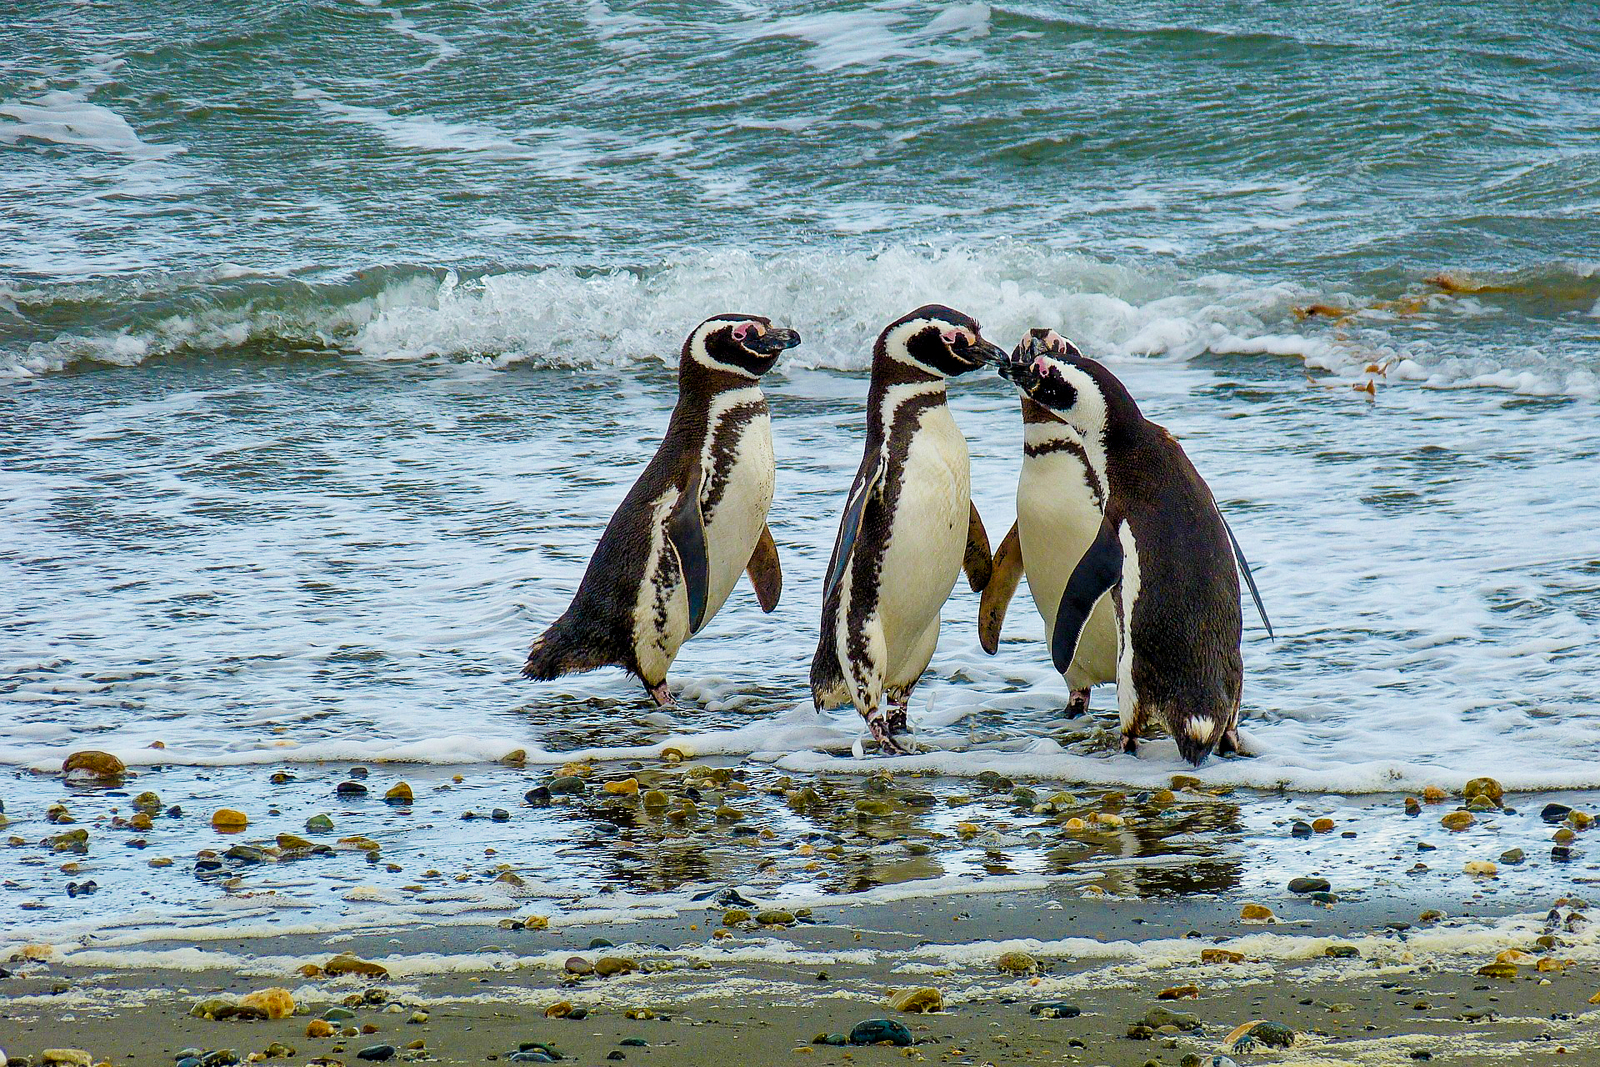 Penguins on the beach in Chile